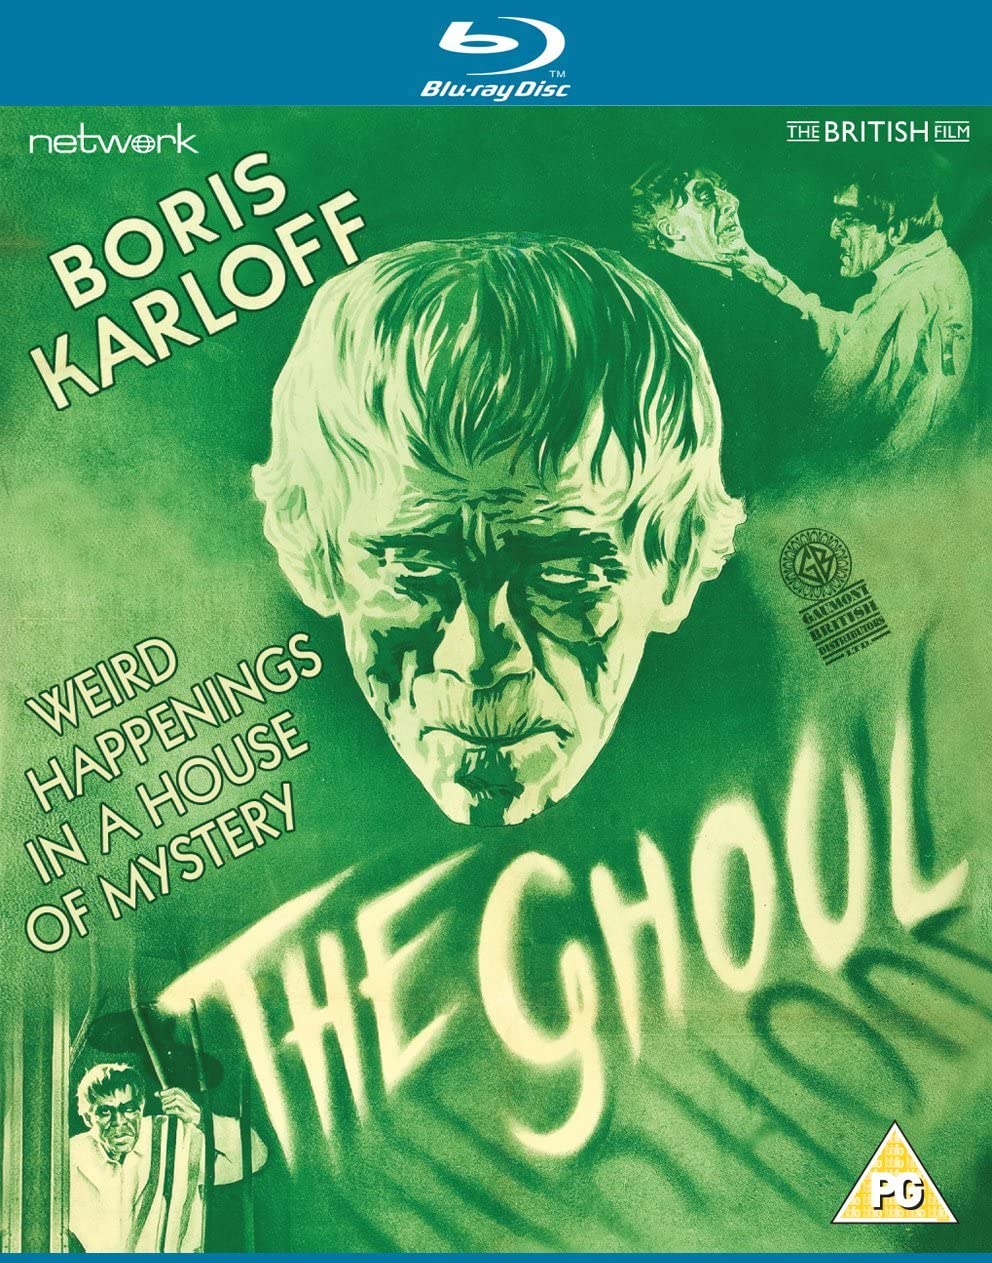 The Ghoul - Thriller/Drama [Blu-ray]